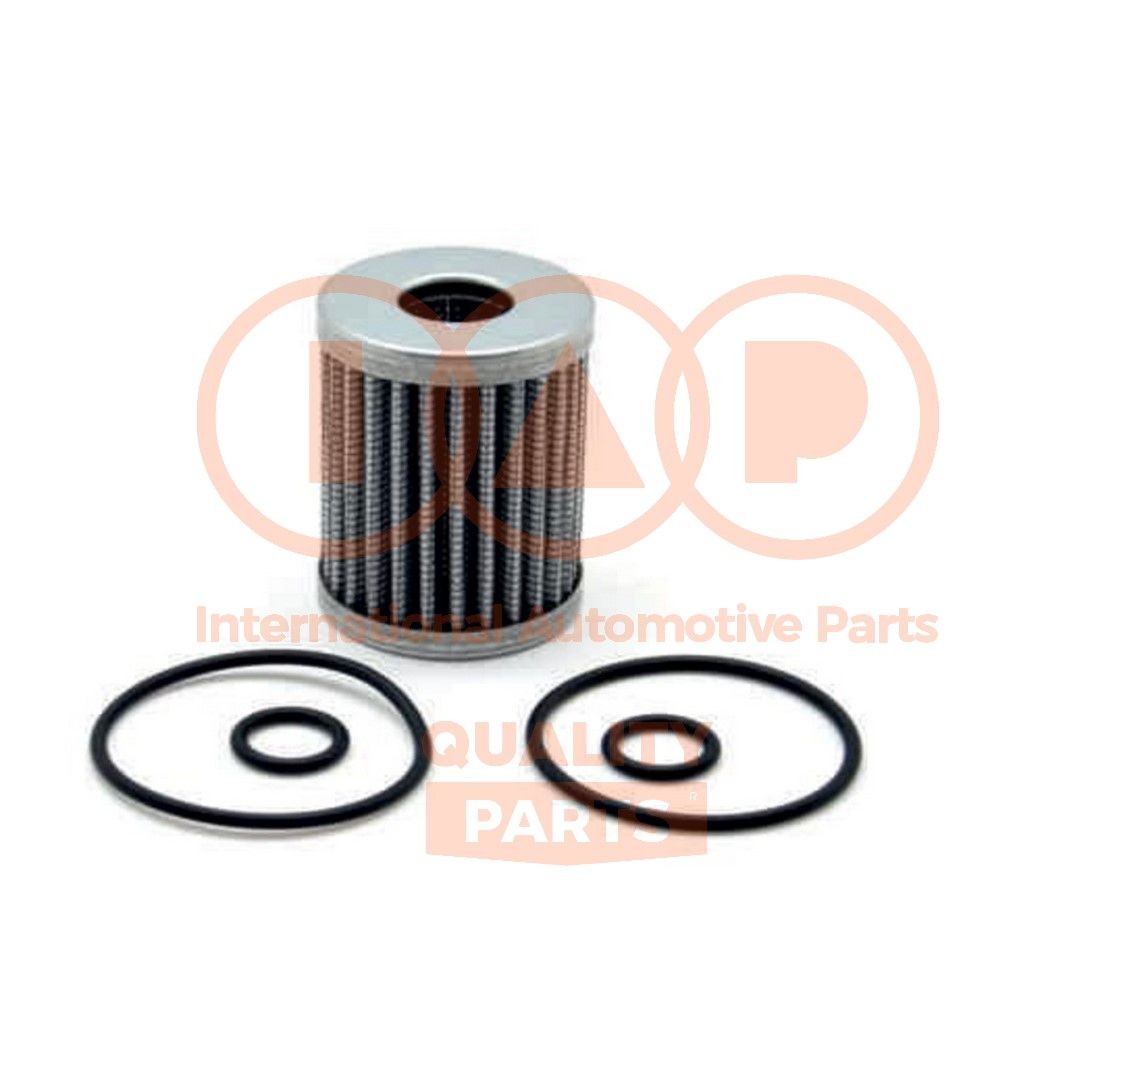 Original IAP QUALITY PARTS Fuel filters 122-GAS07P for FORD MONDEO